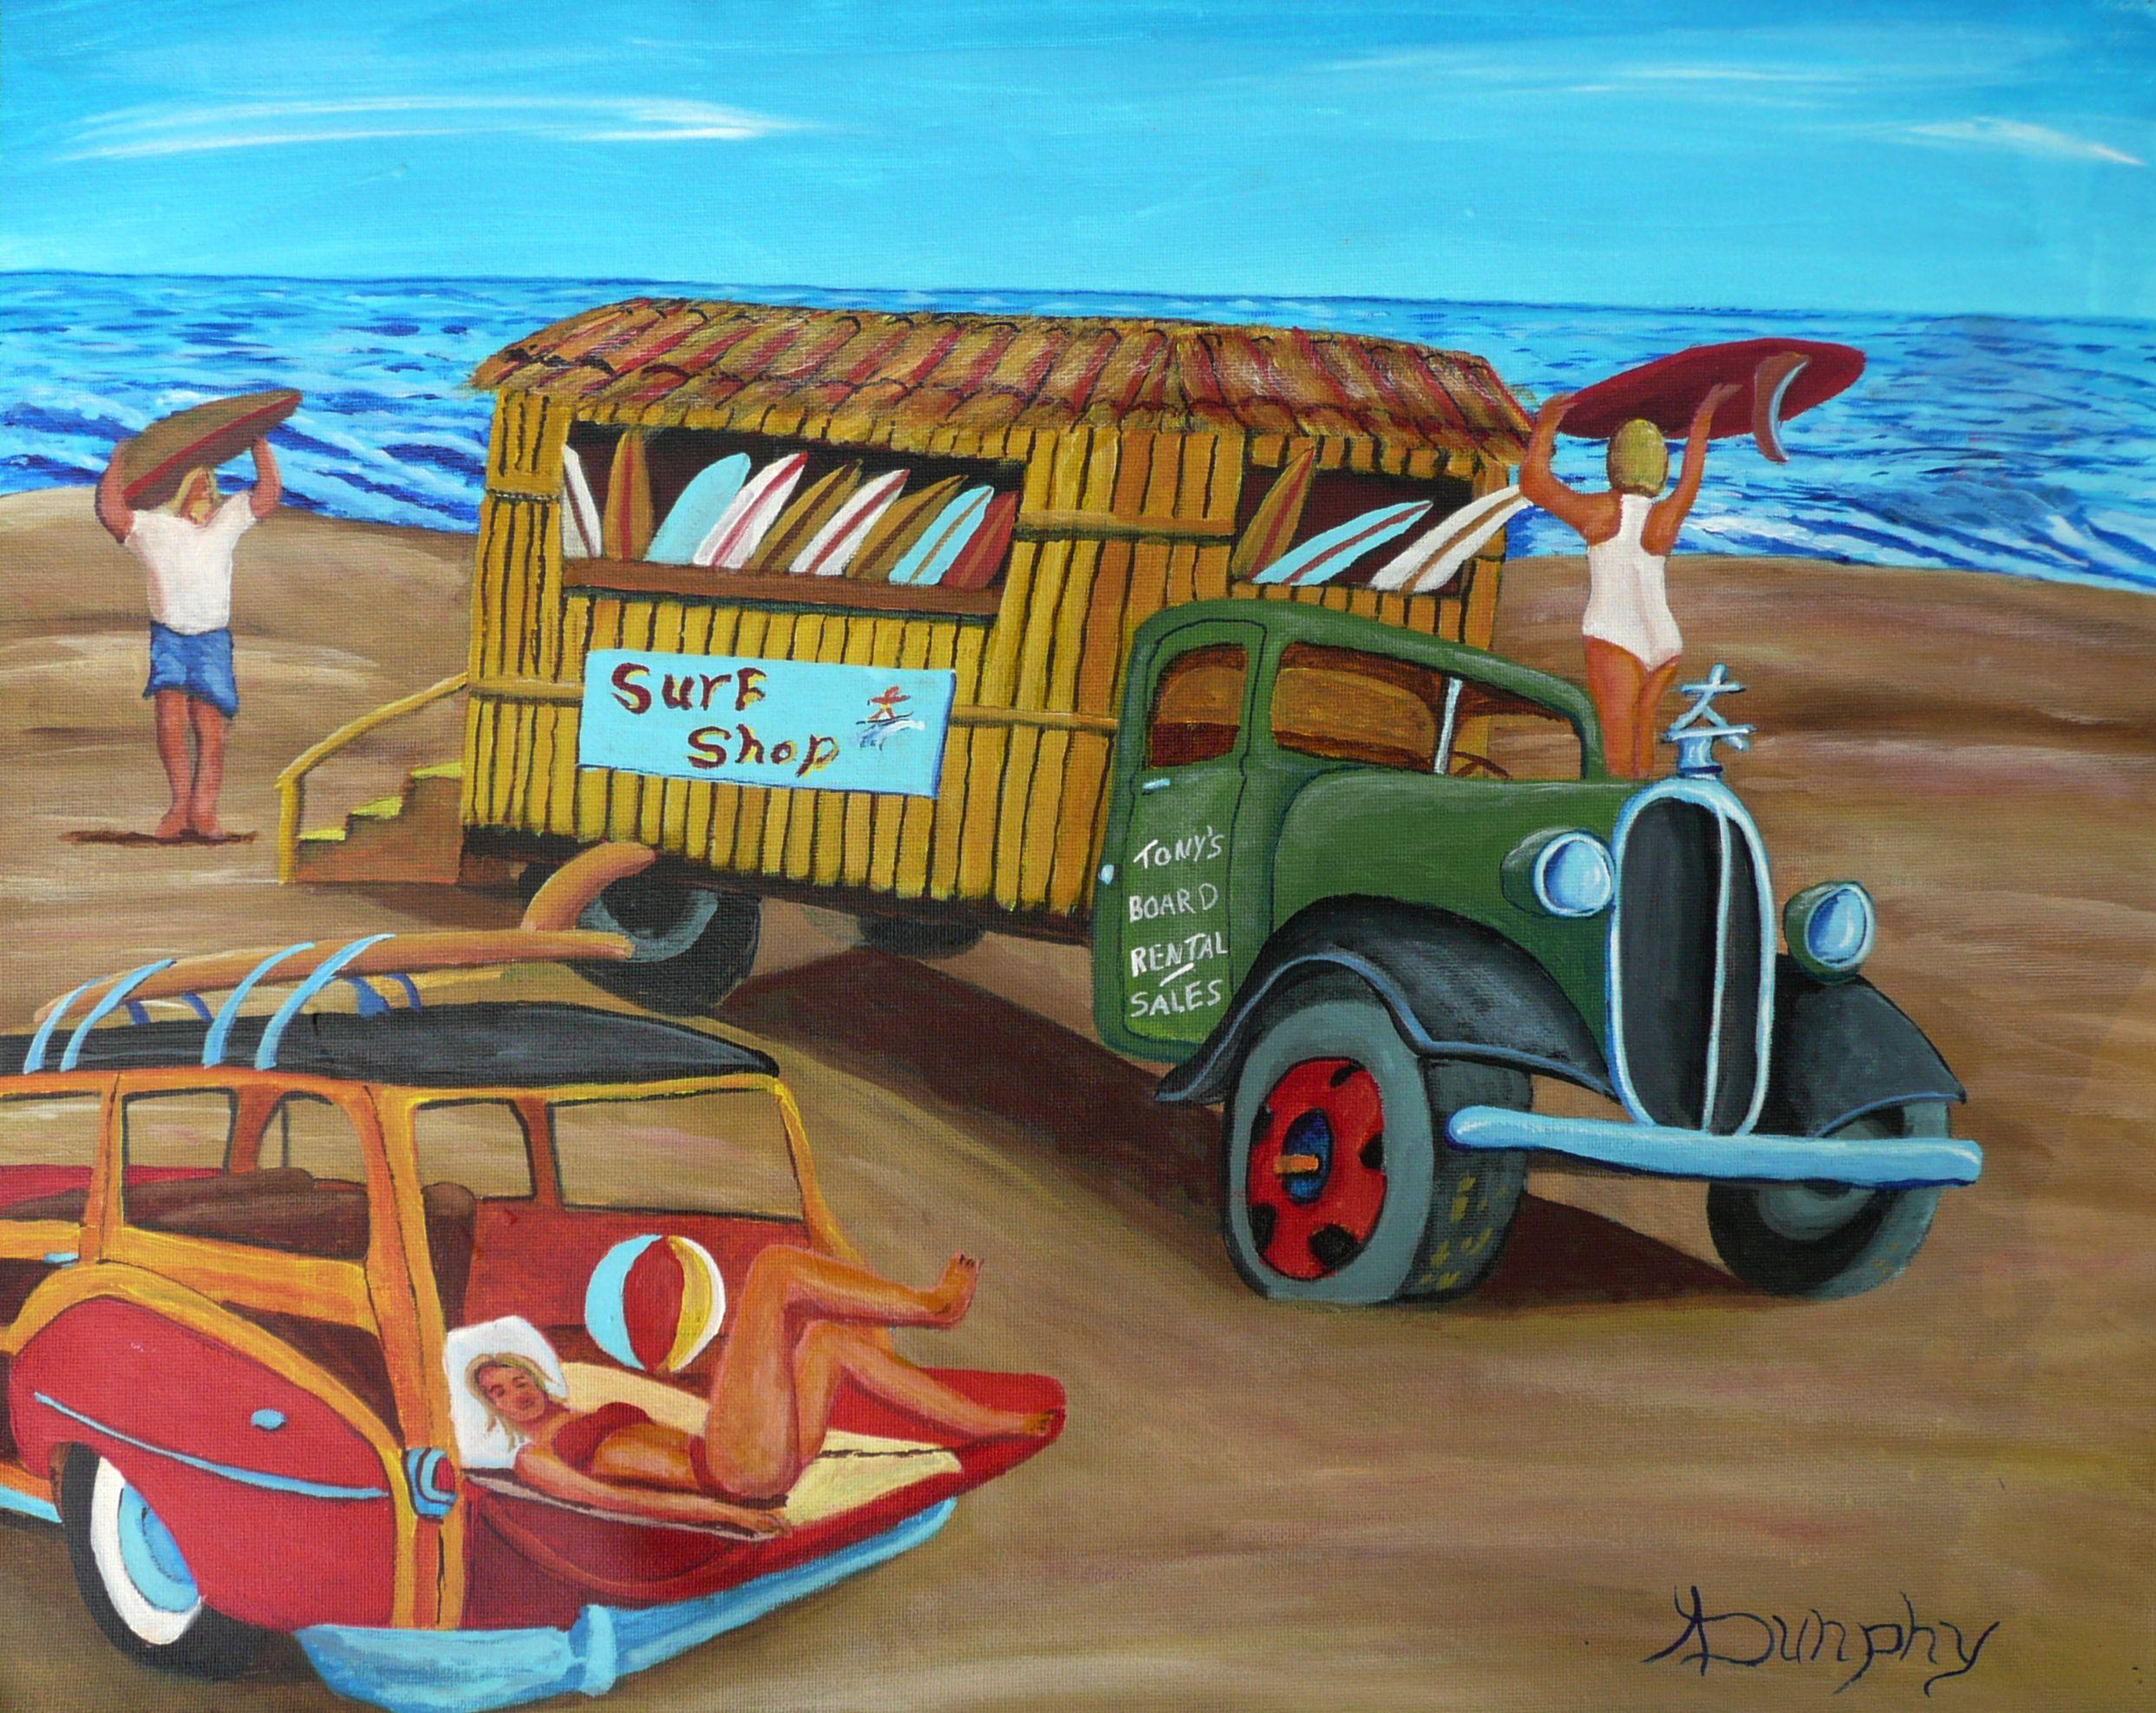 A portable surf shack waits on a beach to serve its surfing public in need of a board as the relaxed owner takes a nap in the sun on the tailgate of her classic Woody wagon.     This summer themed painting has been carefully crafted using all